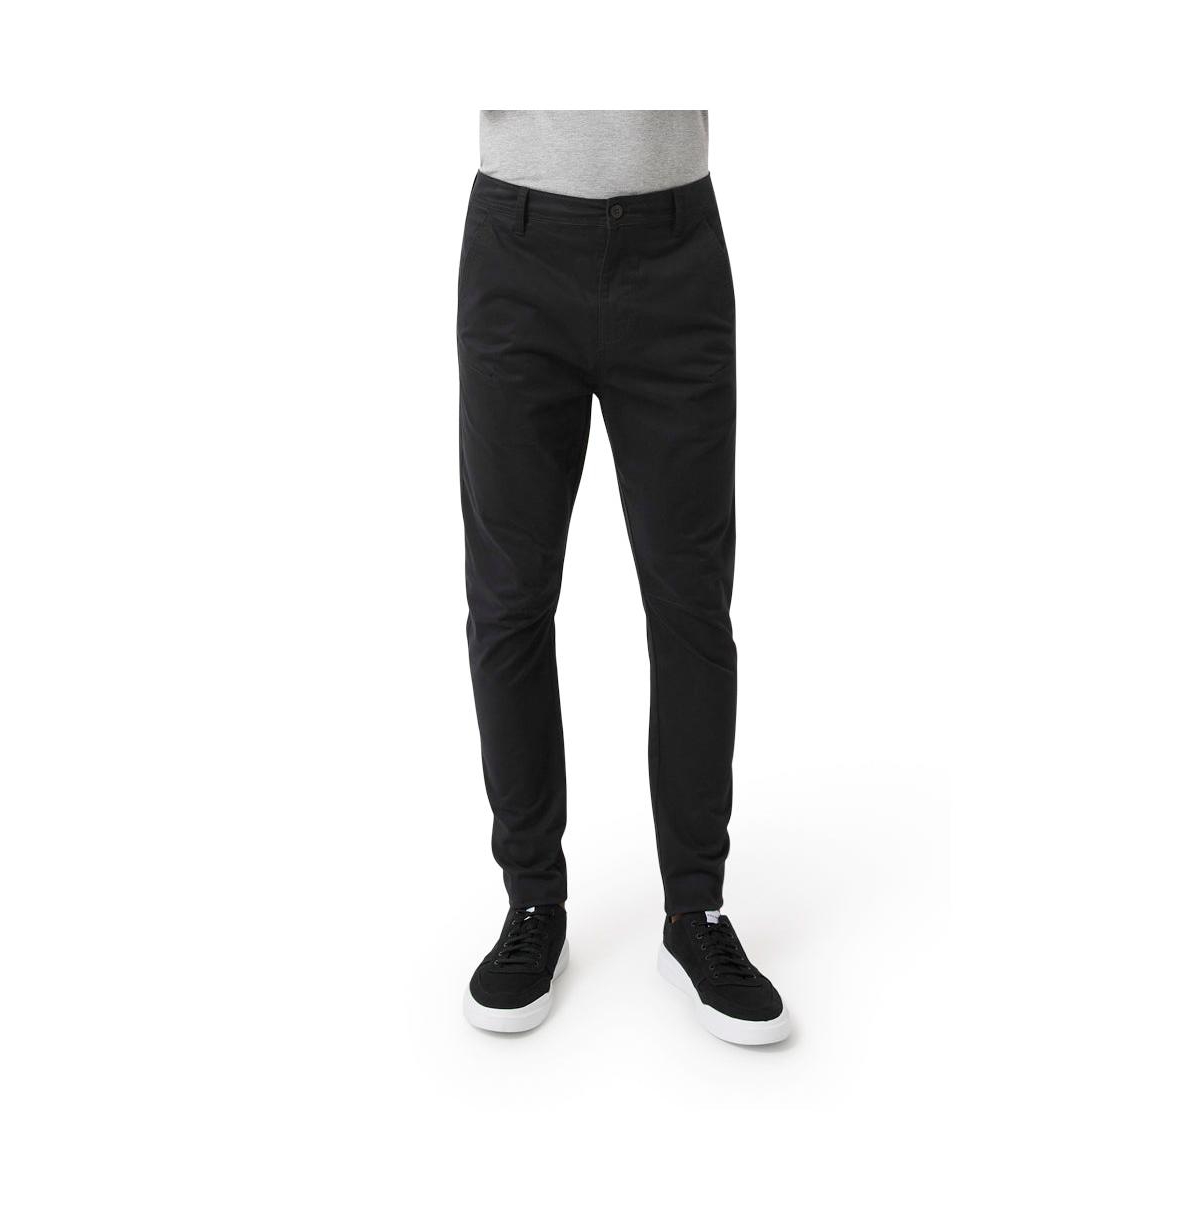 Men's Tapered Fit Sateen Chino Pants - Black